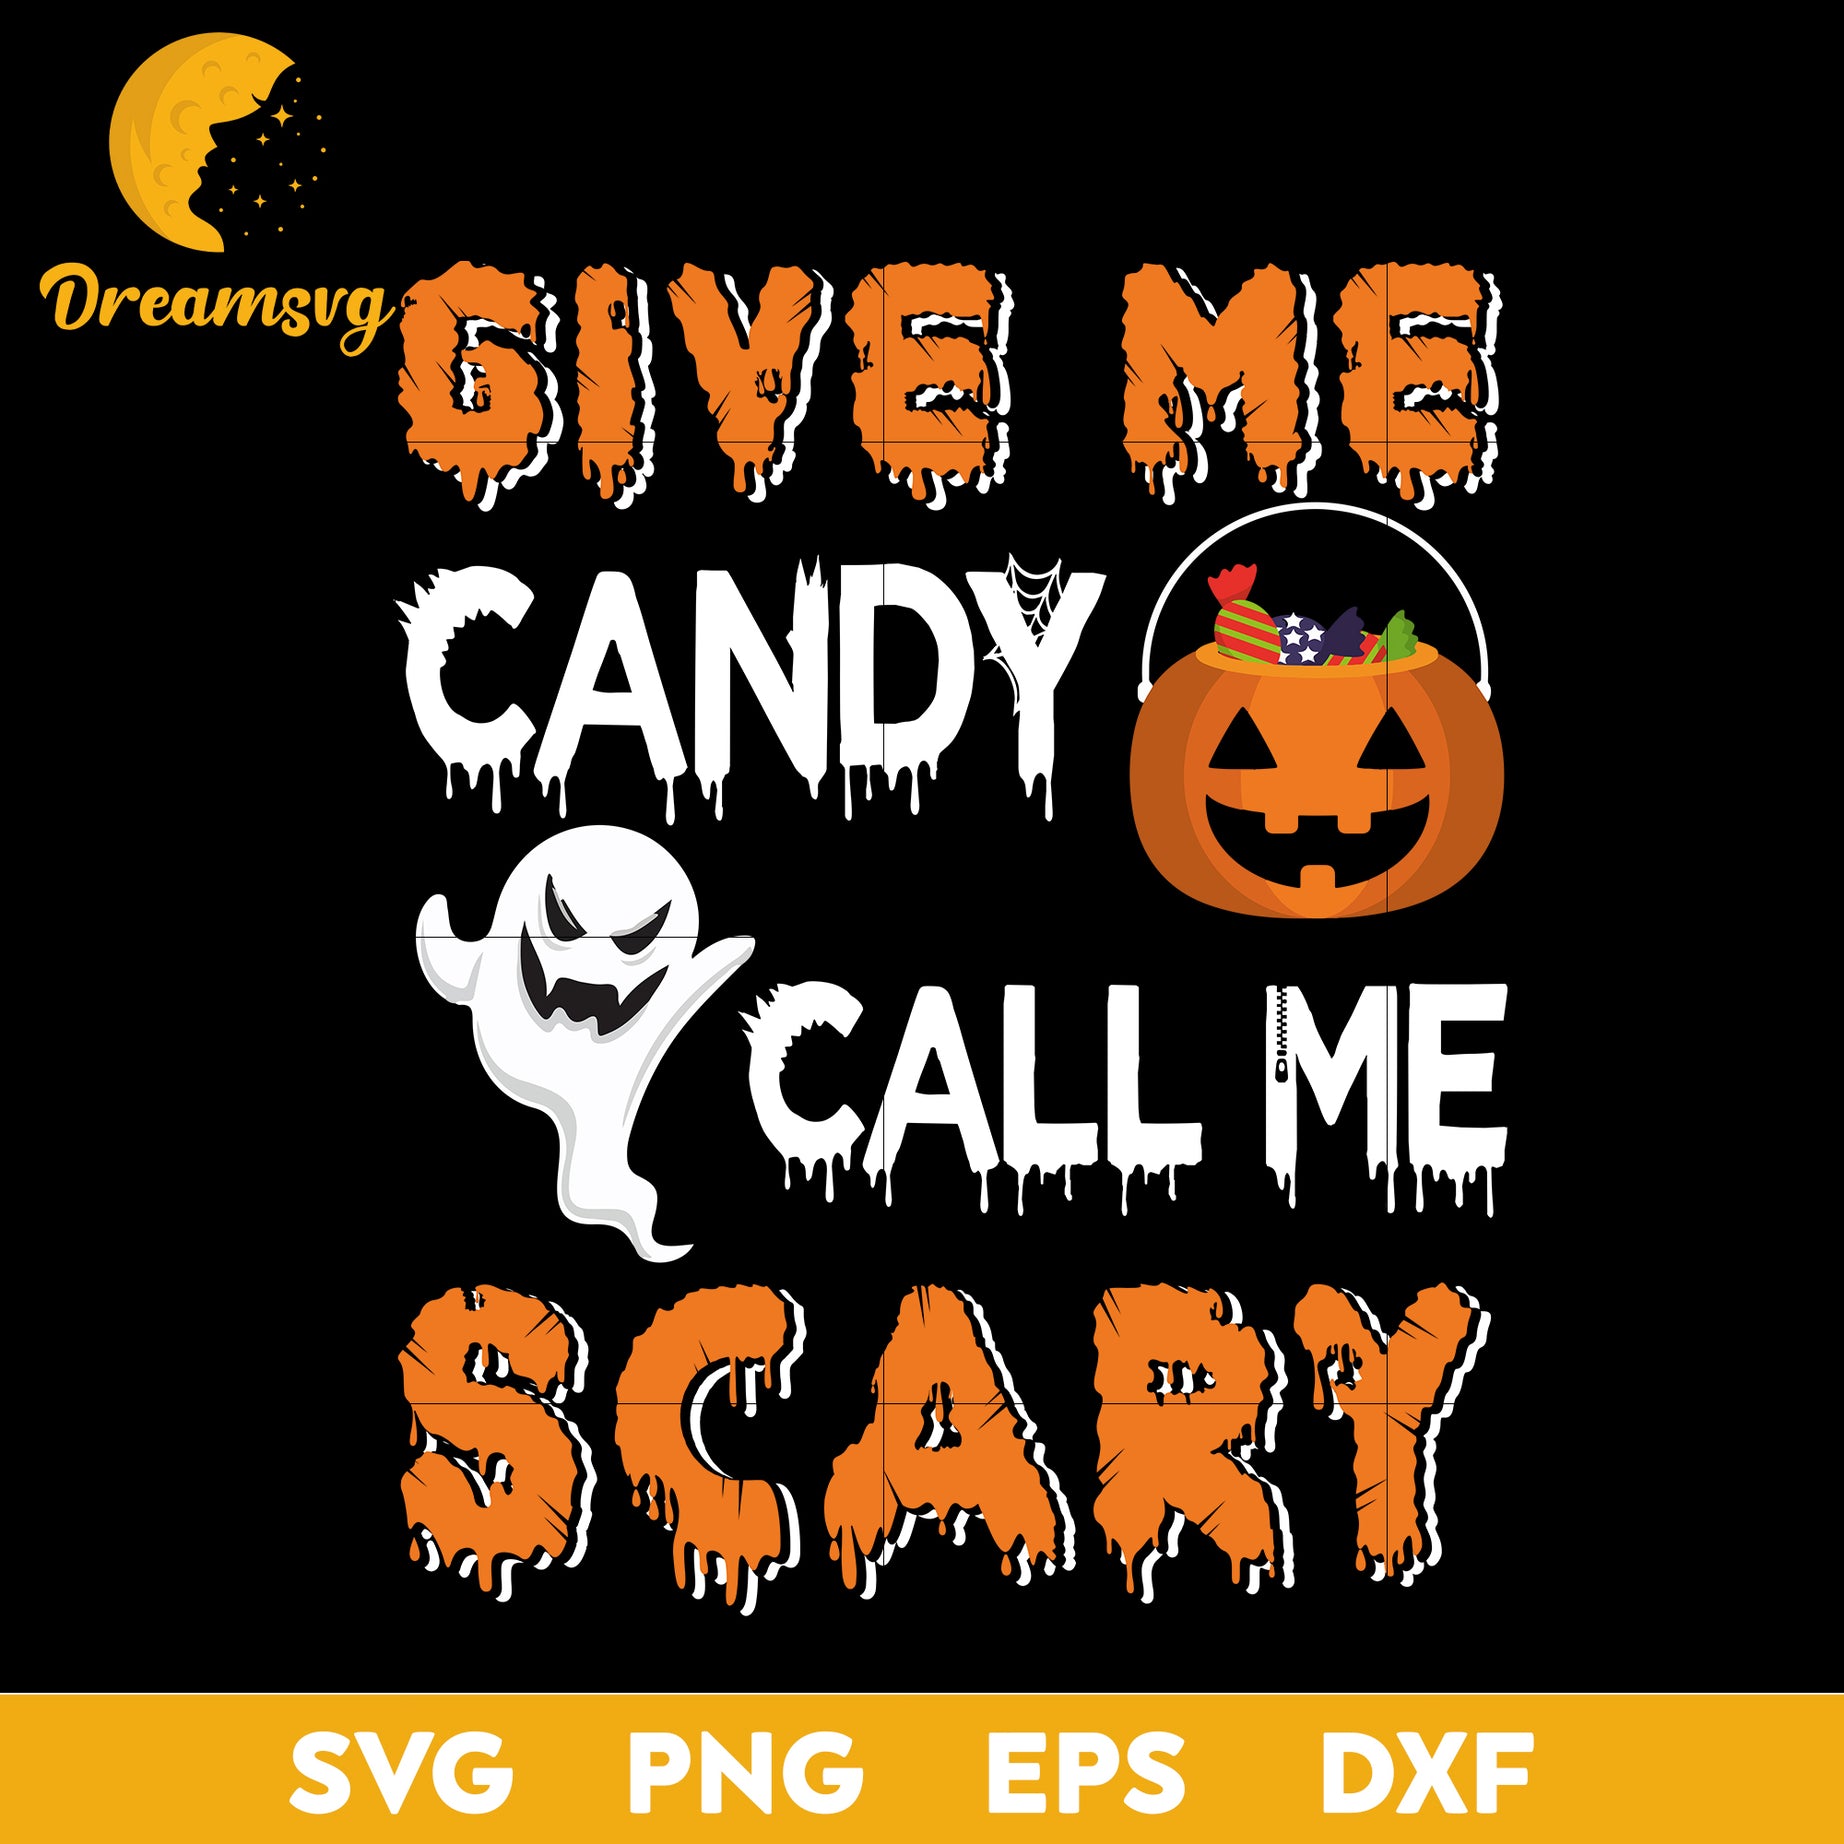 Give me candy call me scary svg, Halloween svg, png, dxf, eps digital file.